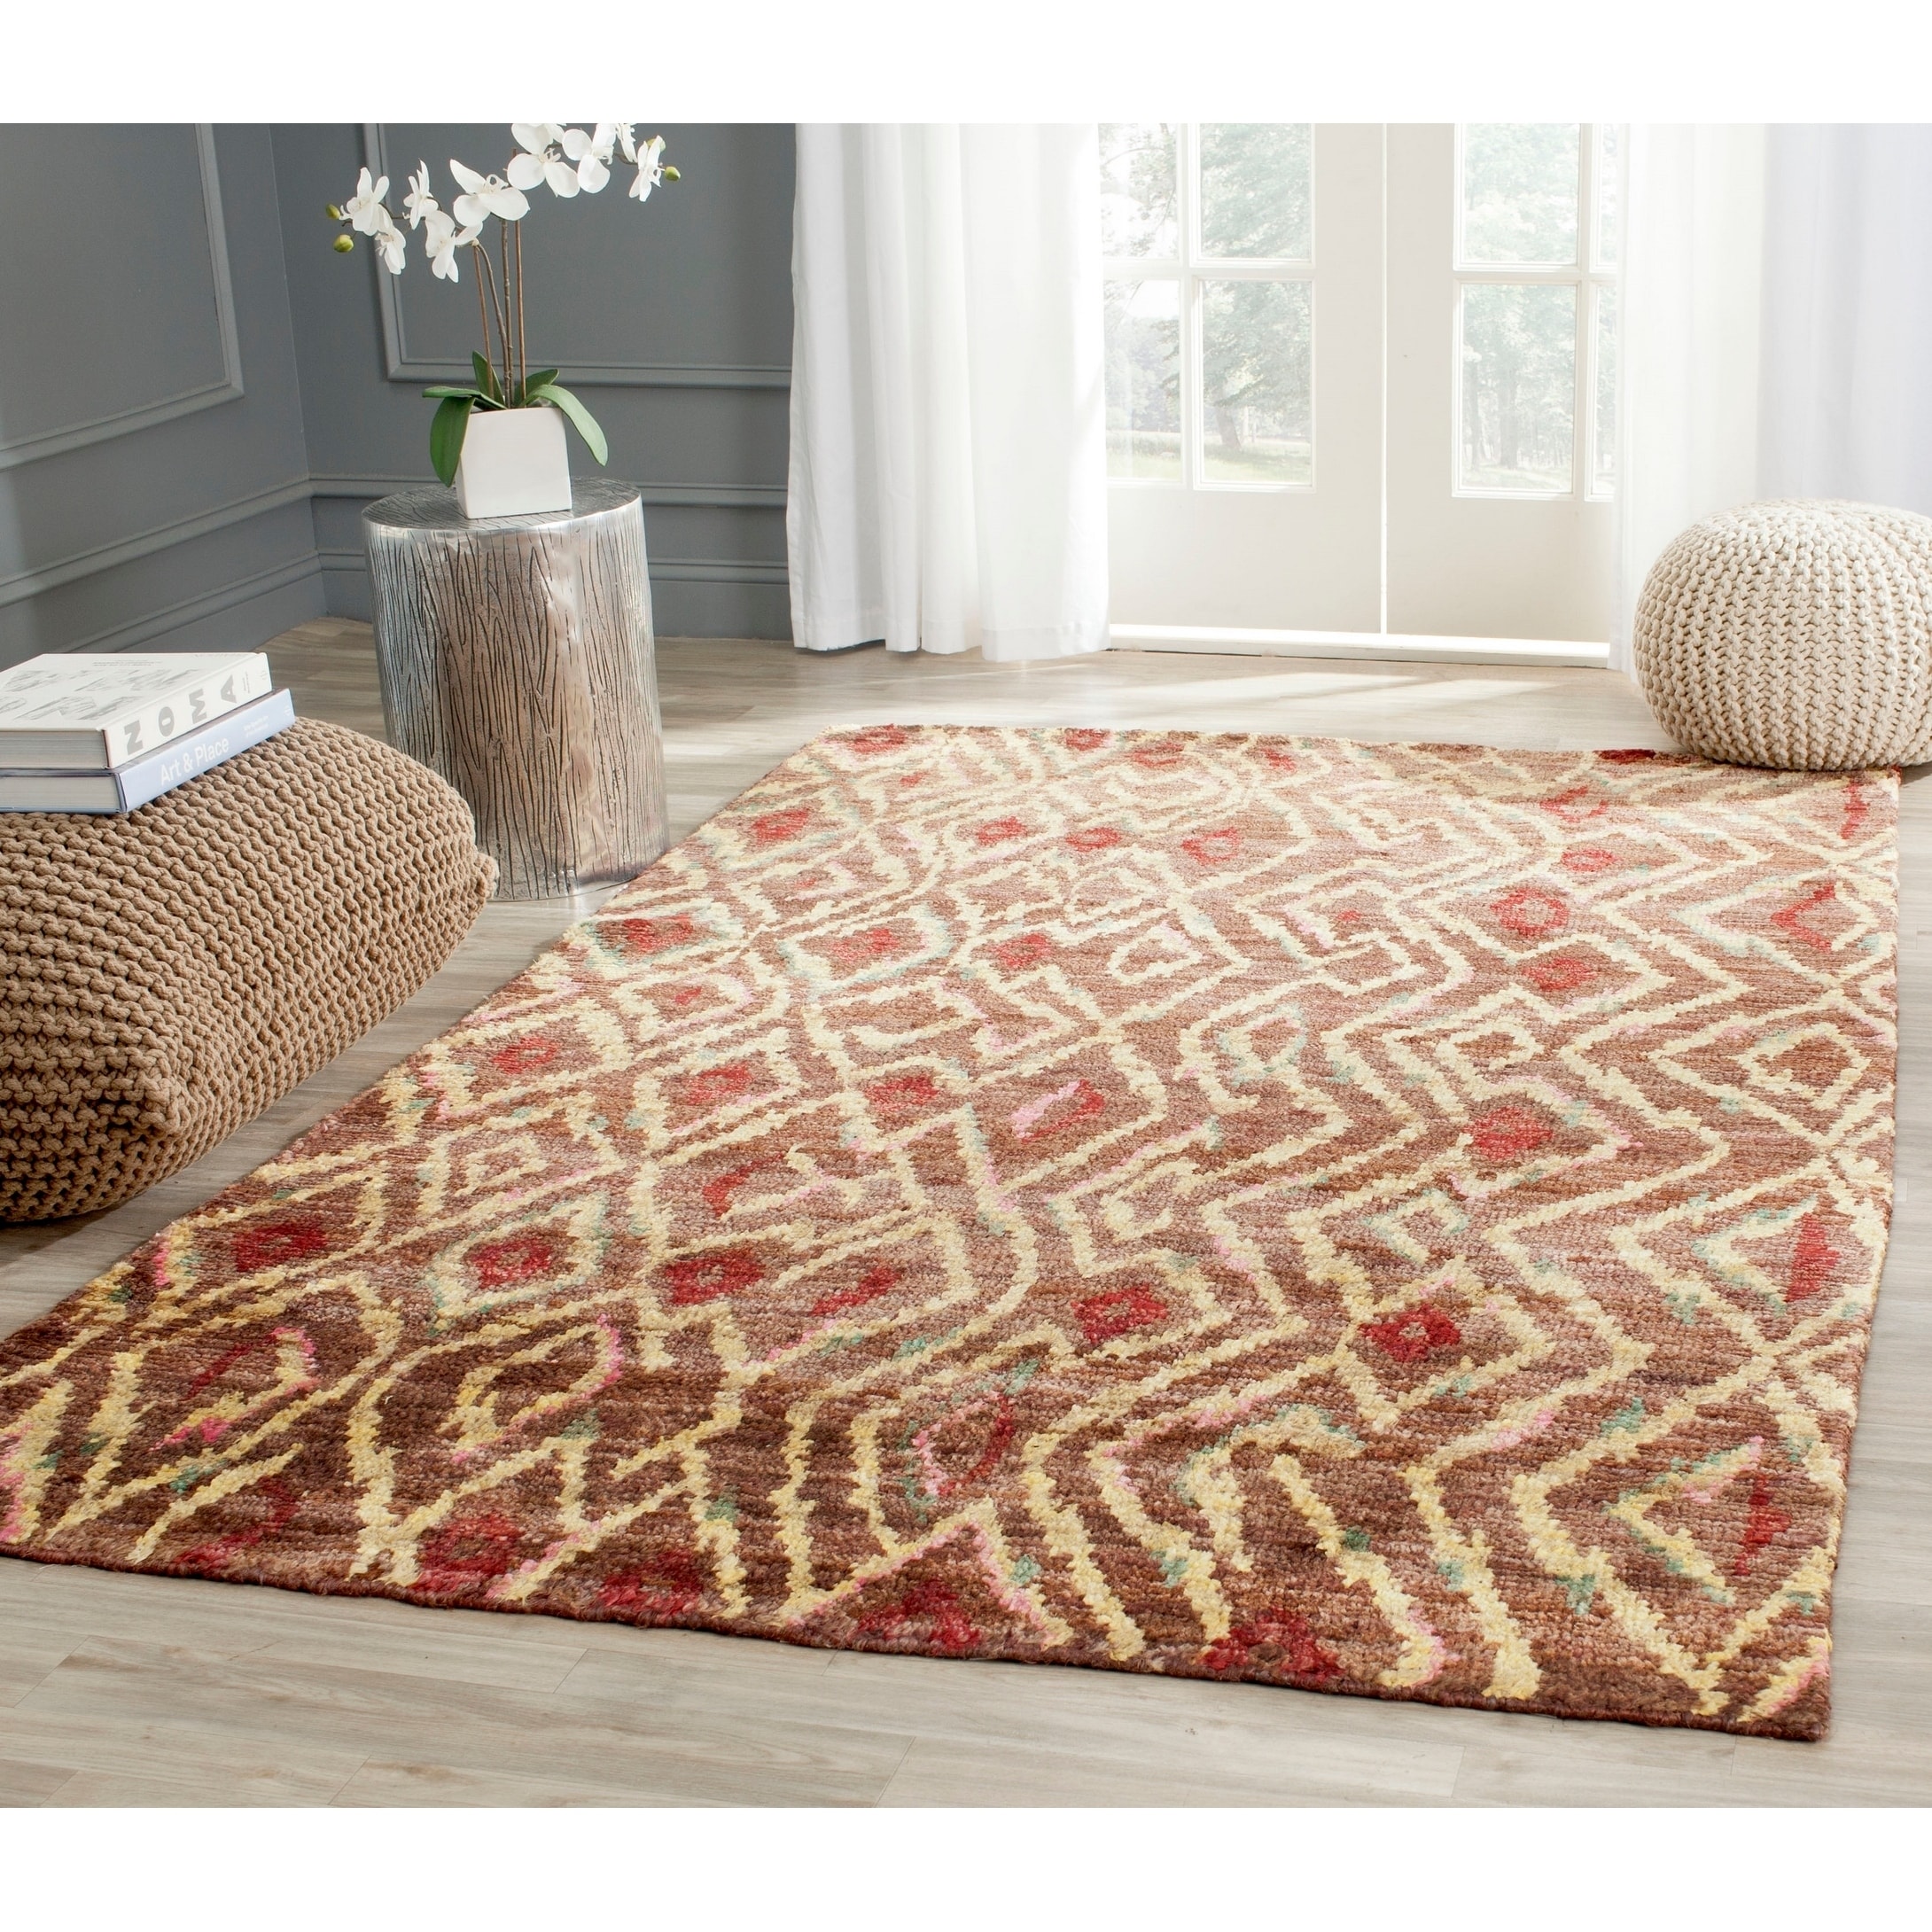 Safavieh Hand knotted Bohemian Brown/ Gold Jute Rug (5 X 8)